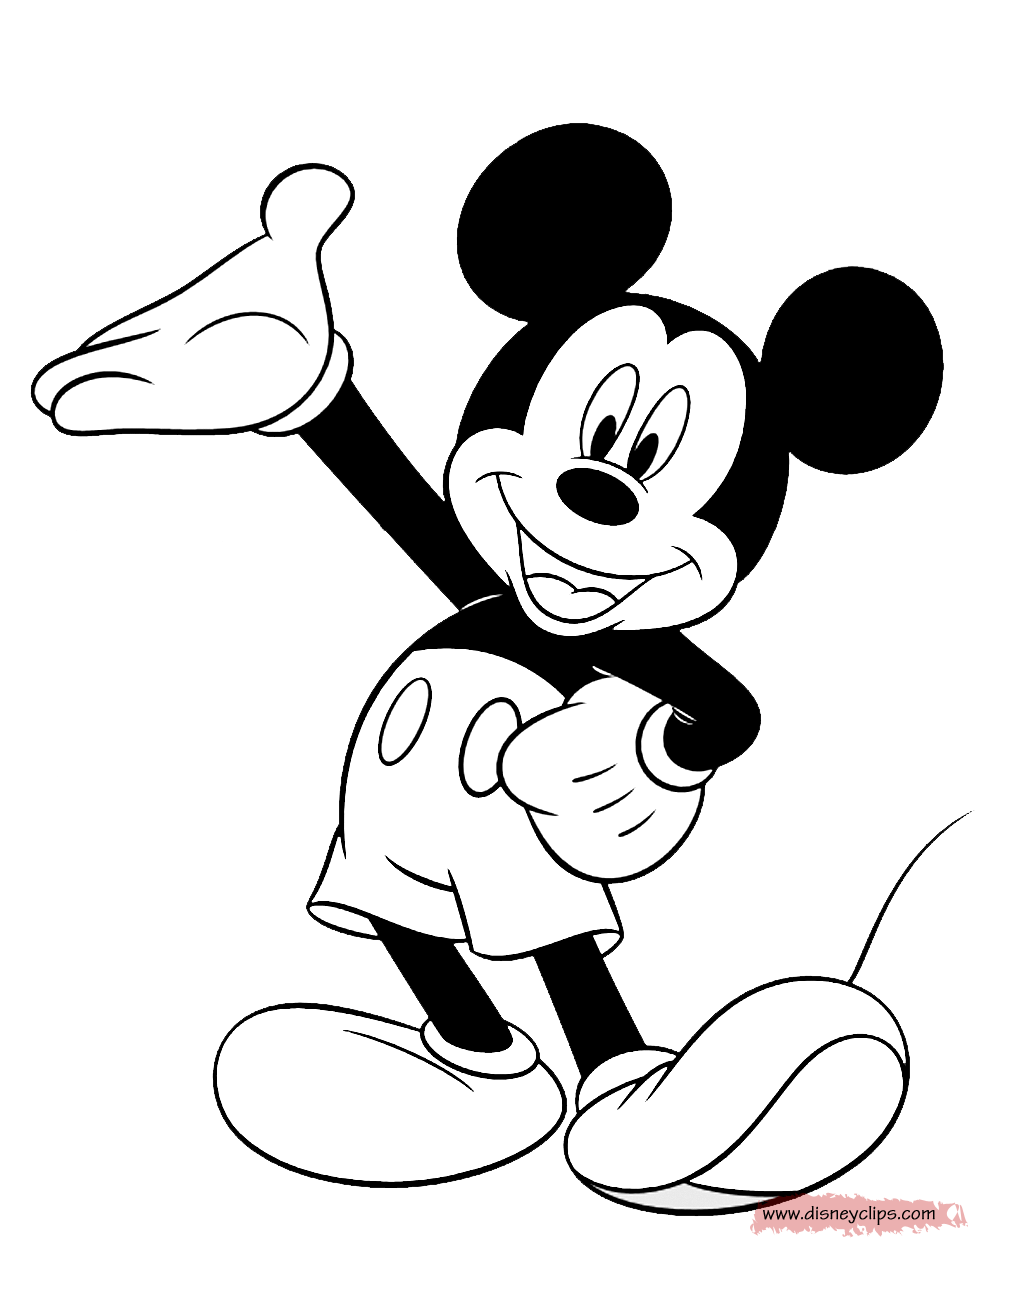 mickey mouse coloring page mickey mouse coloring pages 5 disney coloring book coloring page mickey mouse 